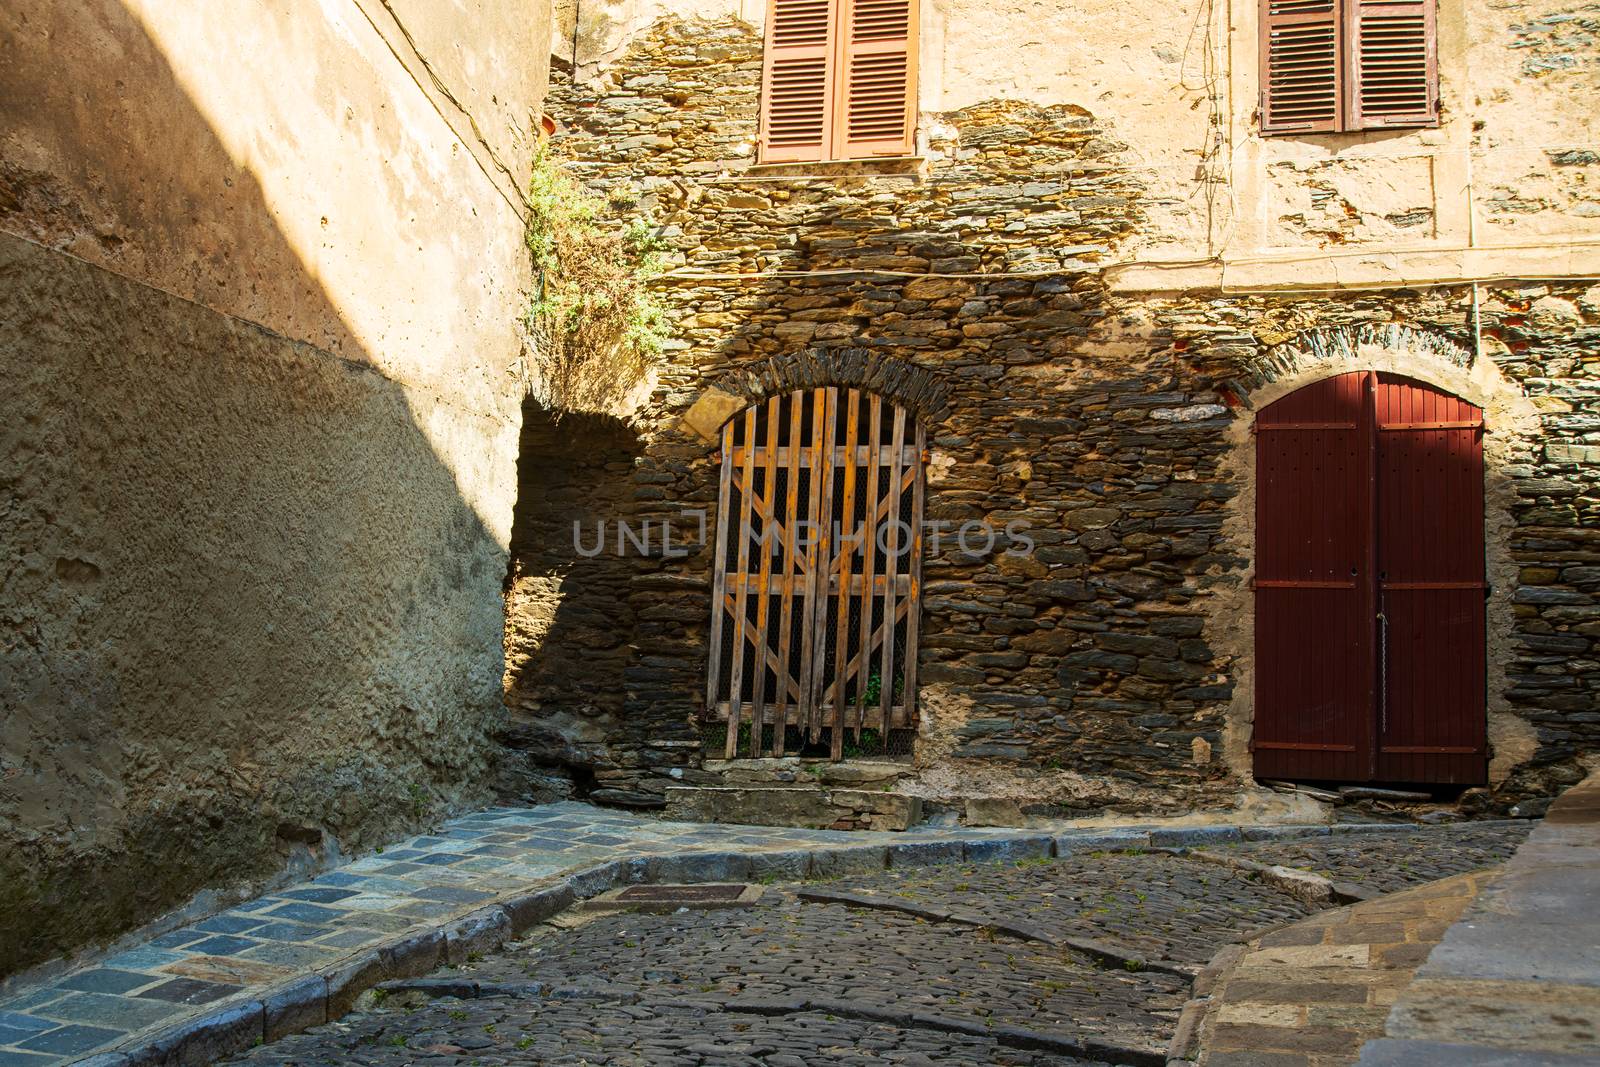 narrow alley with cobblestones in  a village on the isle of Corsica in France during summertime with a nice sunlight on the walls. The entrance of the houses are old wooden ports